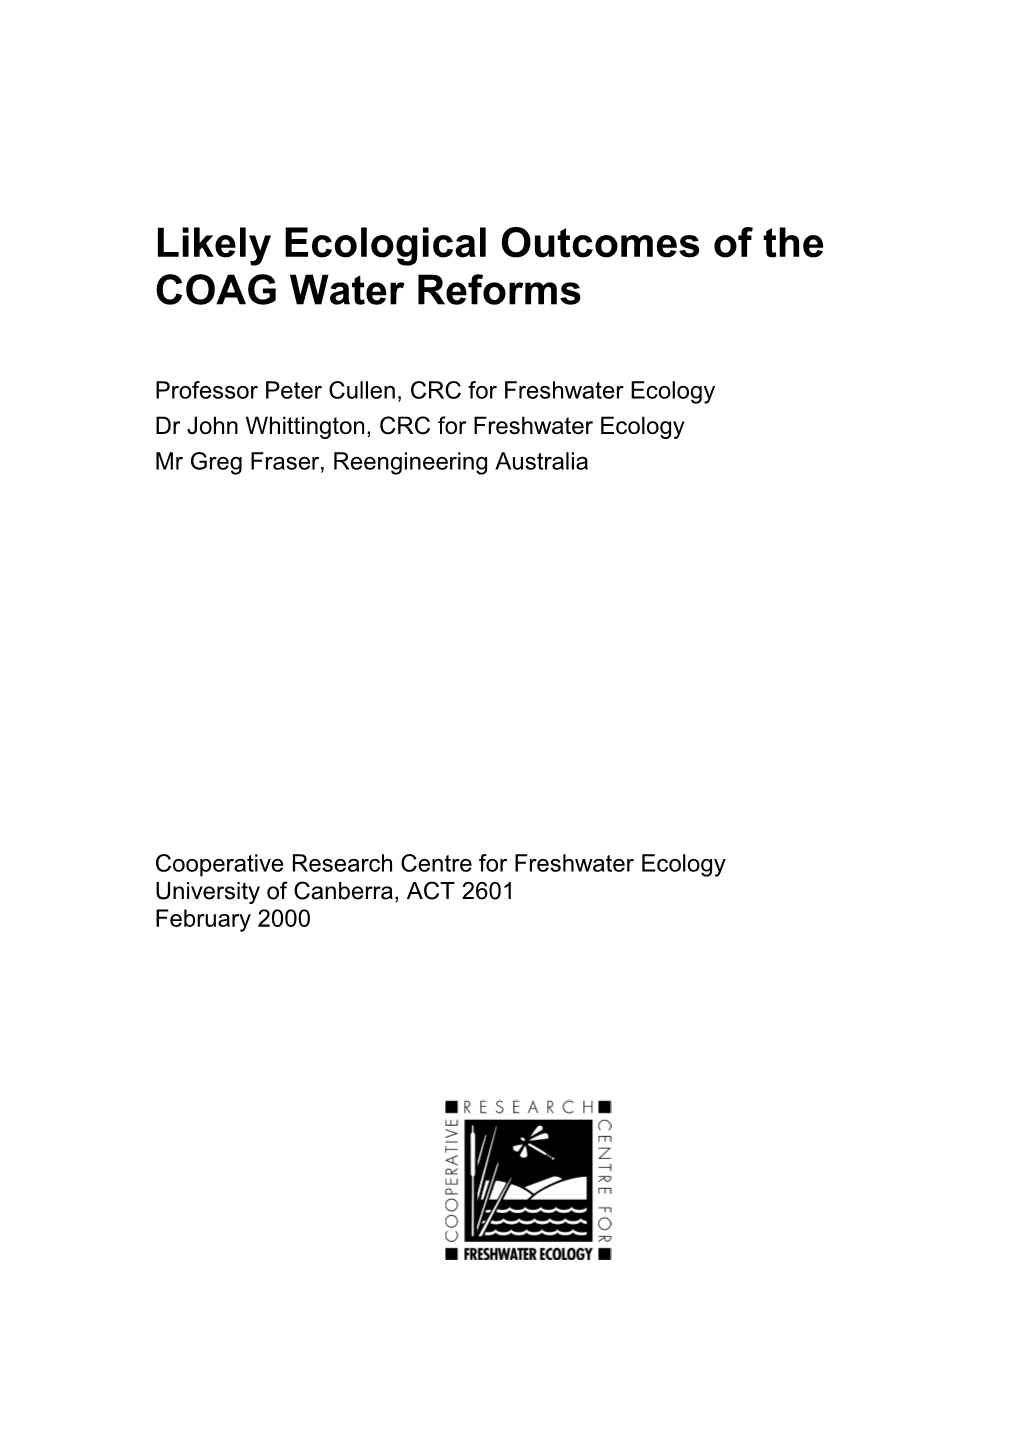 Likely Ecological Outcomes of the COAG Water Reforms